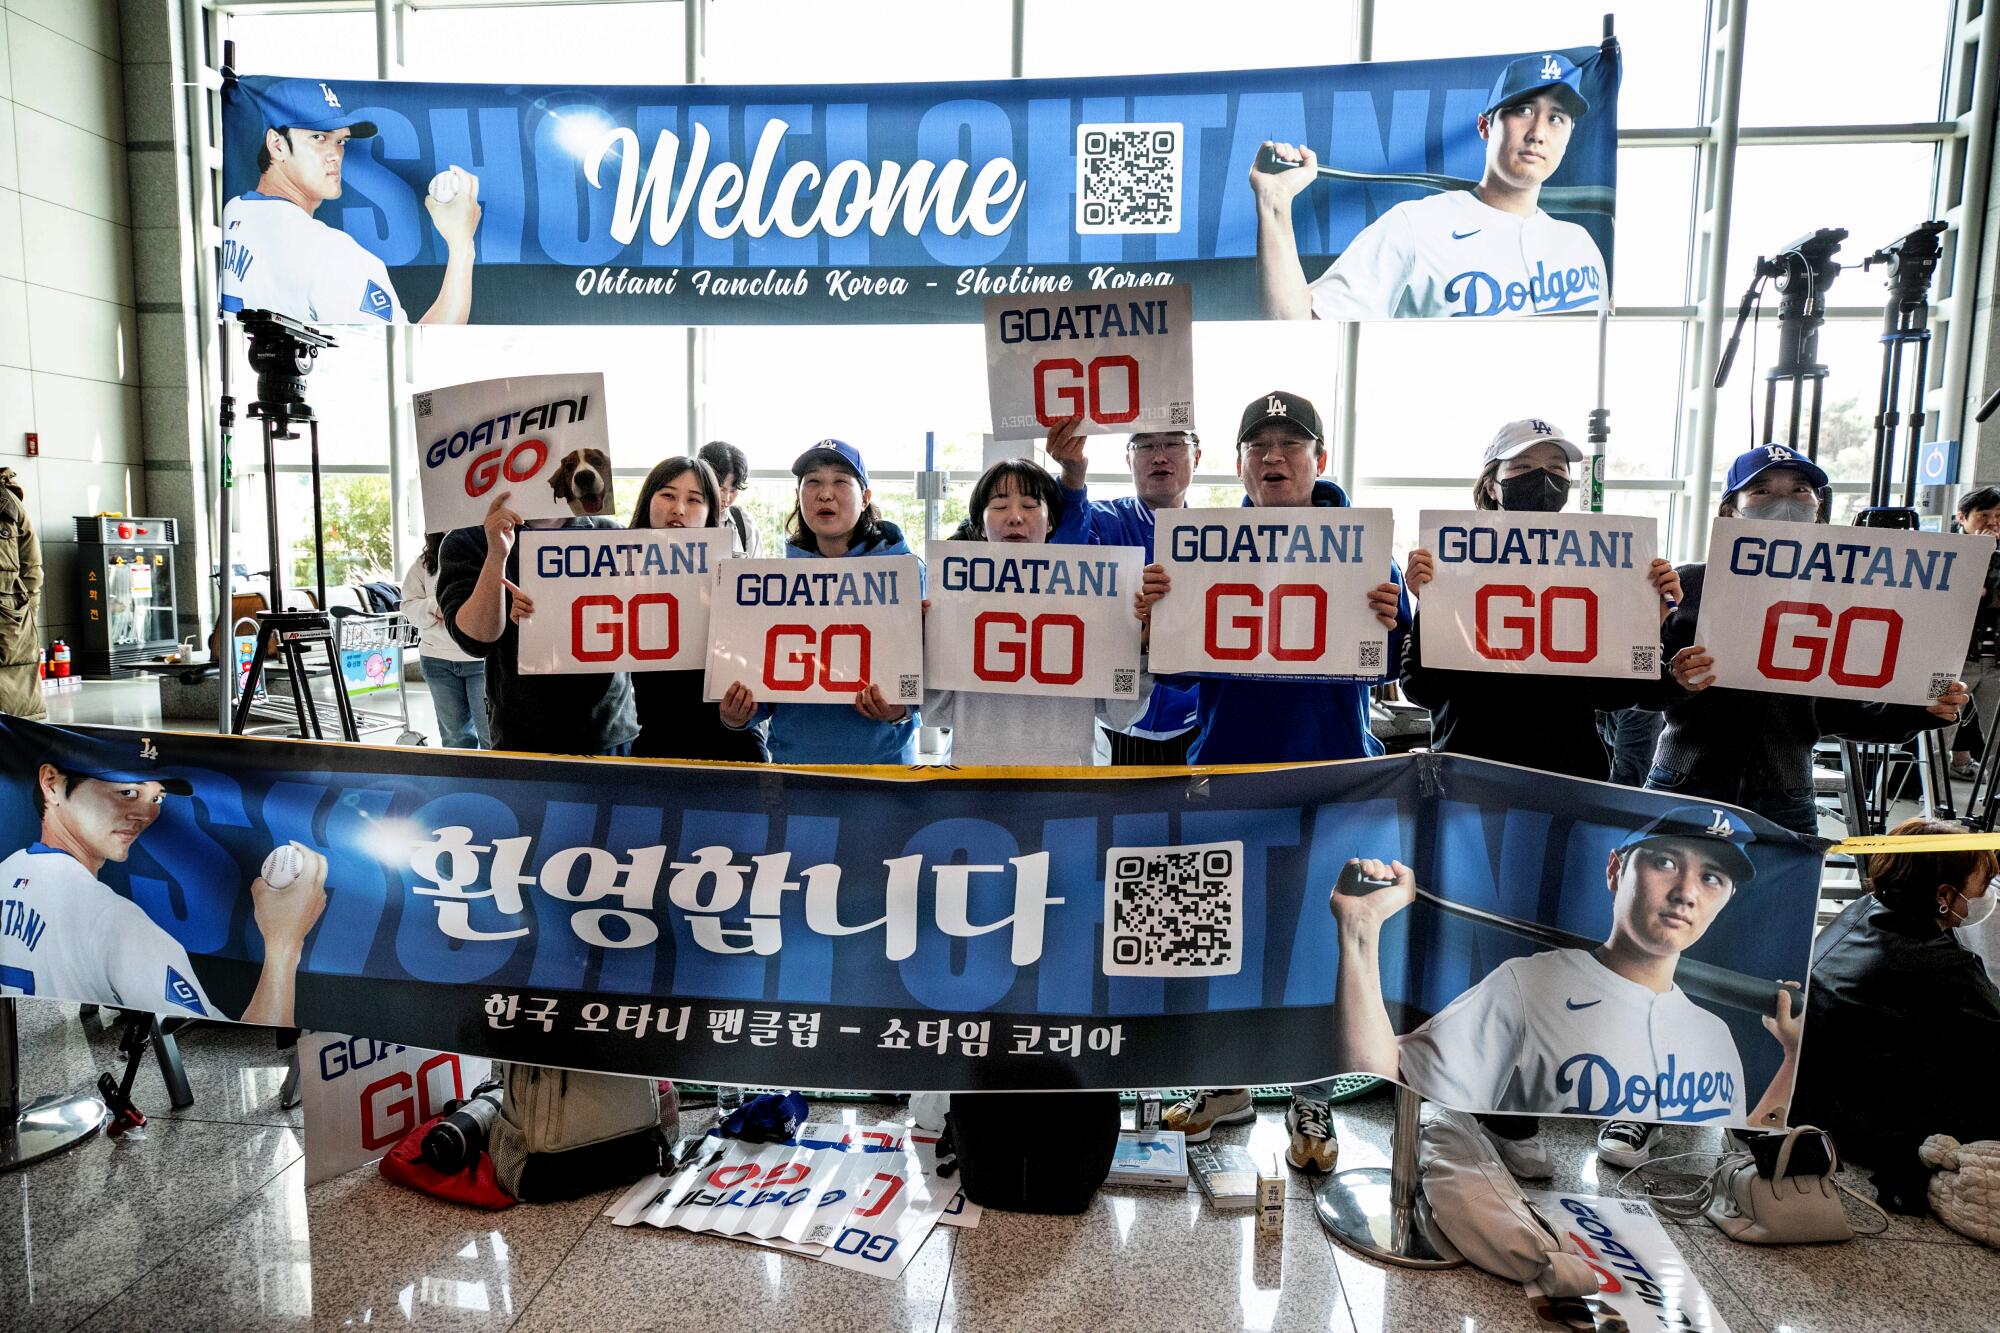 Ohtani fans line up with banners and handheld signs reading "Goatani Go."